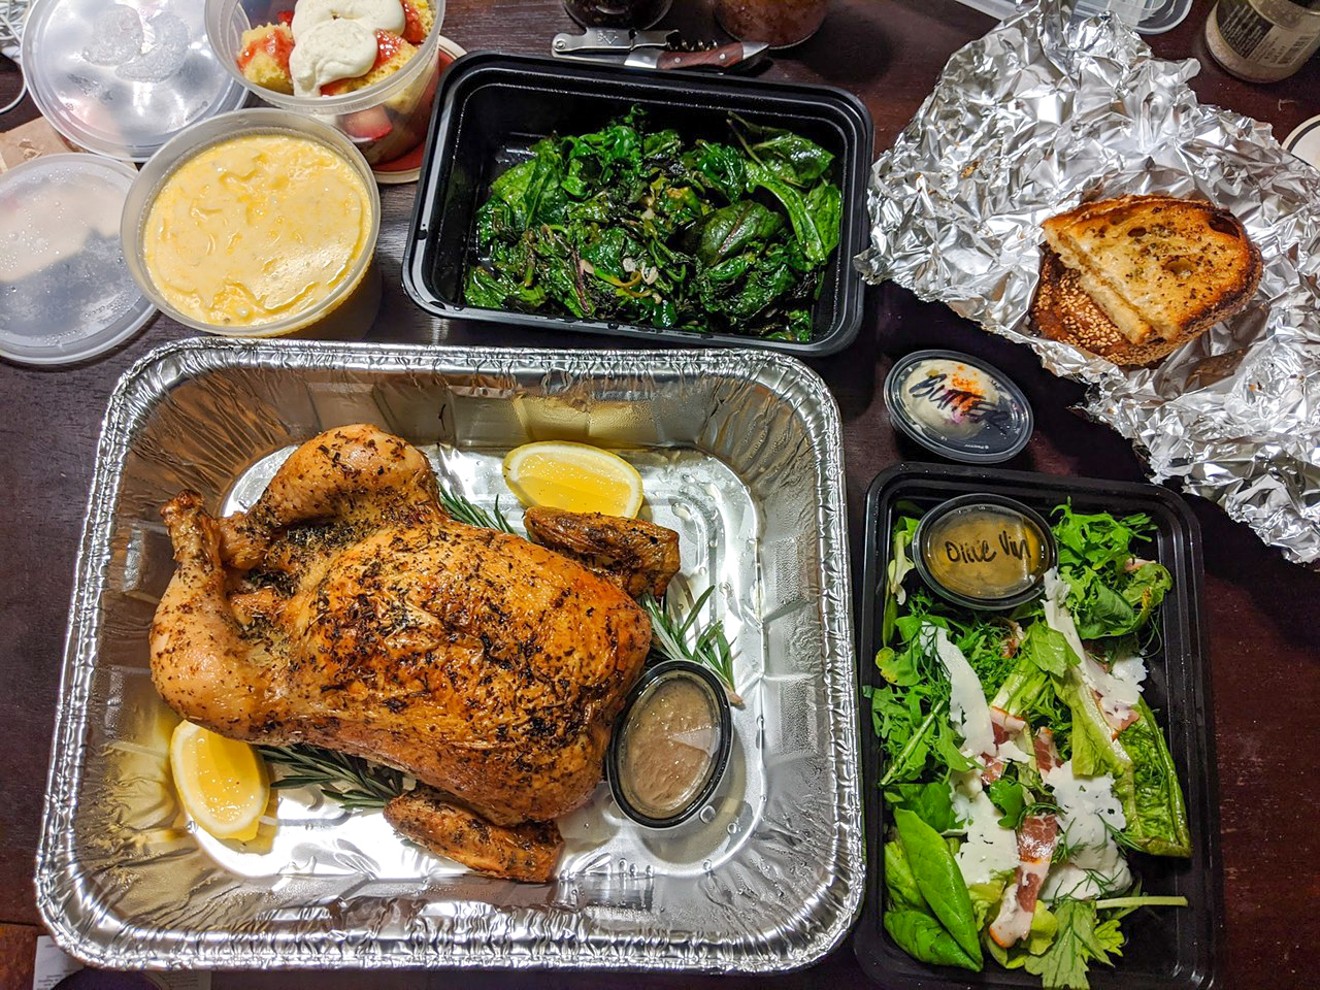 Homewood's $80 roasted chicken dinner for two with wilted greens, salad, garlic sourdough, cheesy grits and strawberry shortcake.